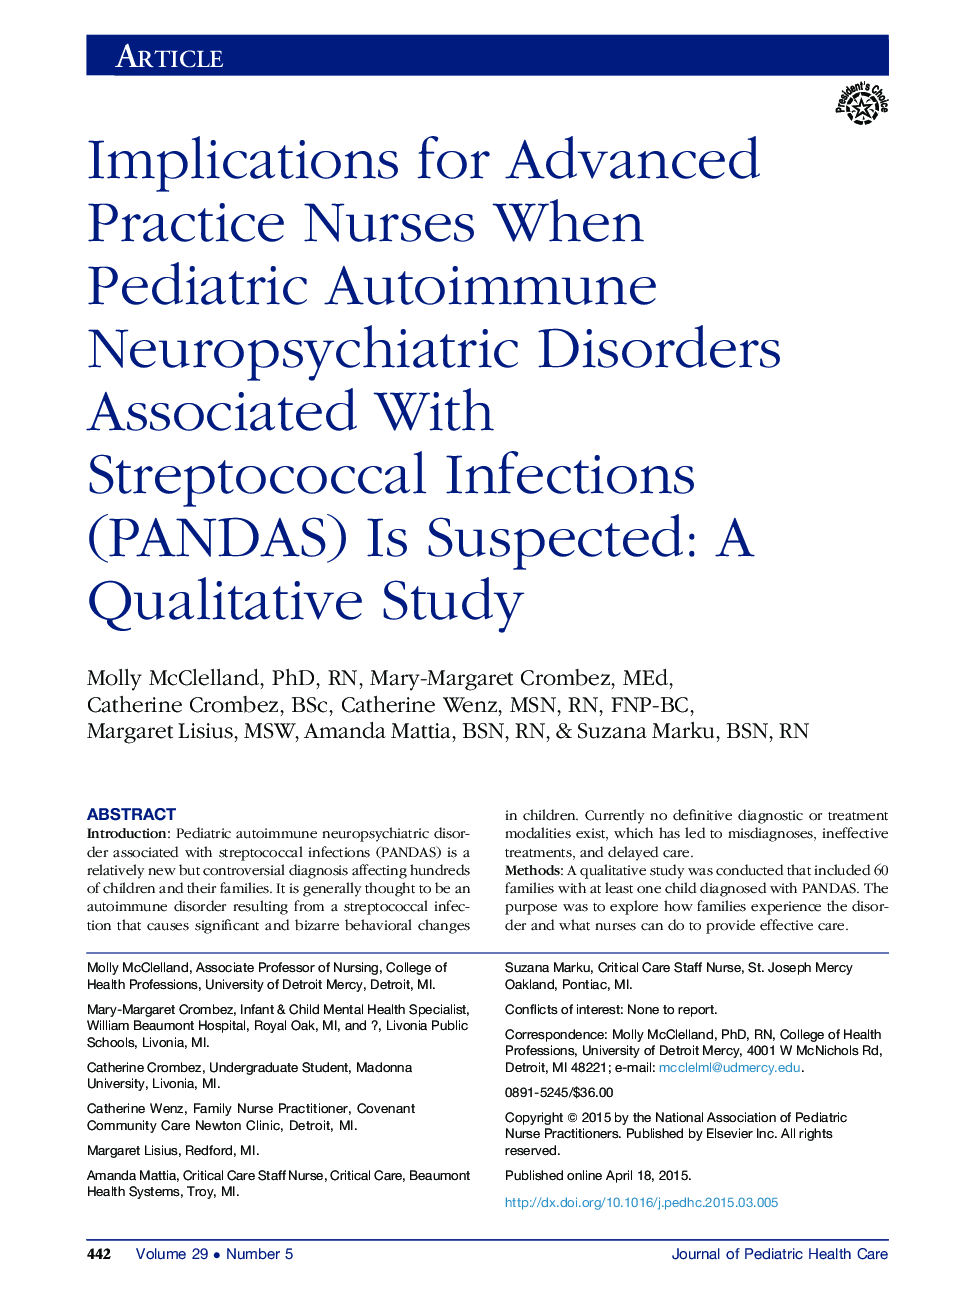 Implications for Advanced Practice Nurses When Pediatric Autoimmune Neuropsychiatric Disorders Associated With Streptococcal Infections (PANDAS) Is Suspected: A Qualitative Study 